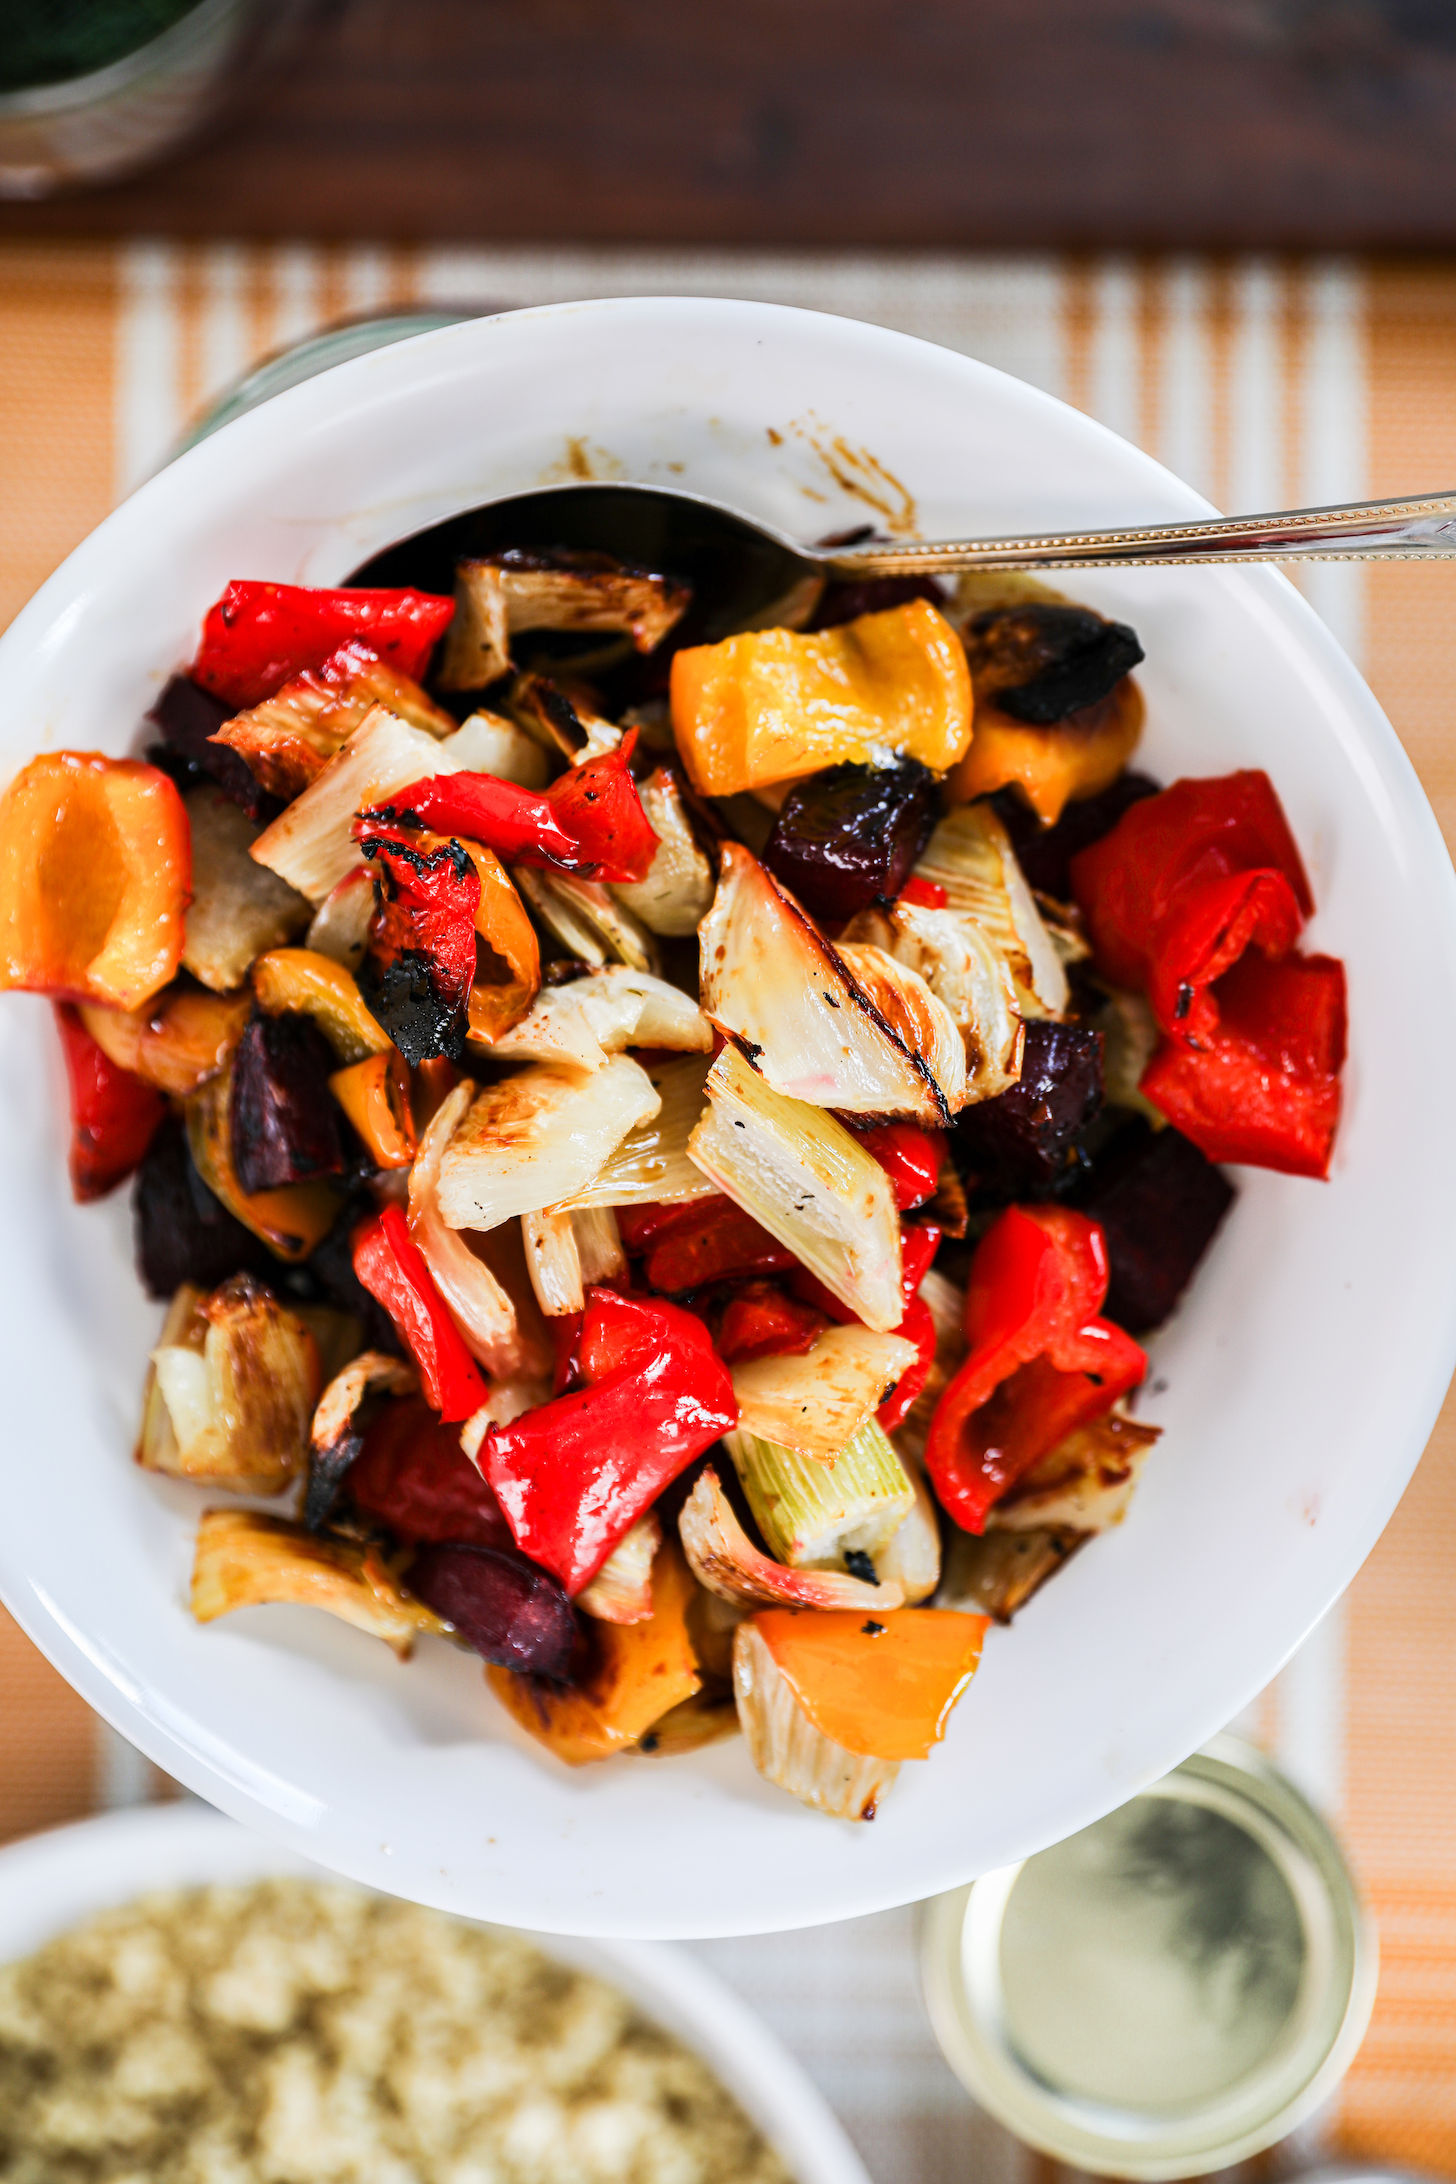 A bowl filled with oven-roasted vegetables, showcasing peppers, beets, and fennel.